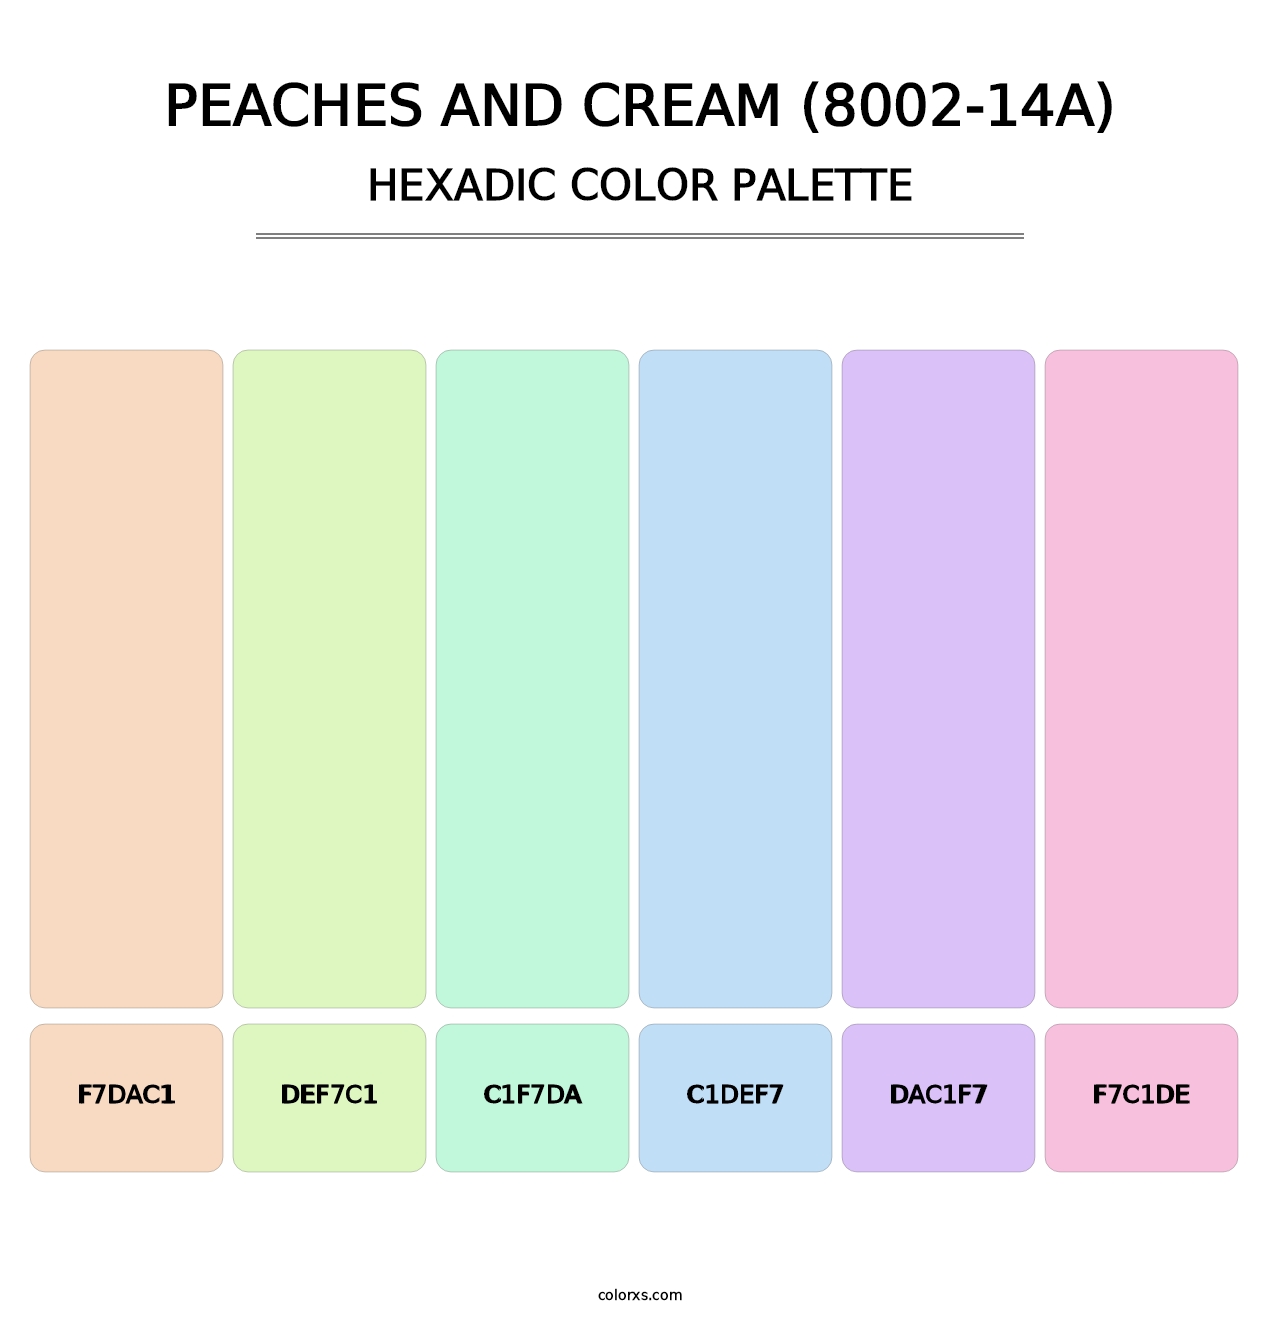 Peaches and Cream (8002-14A) - Hexadic Color Palette